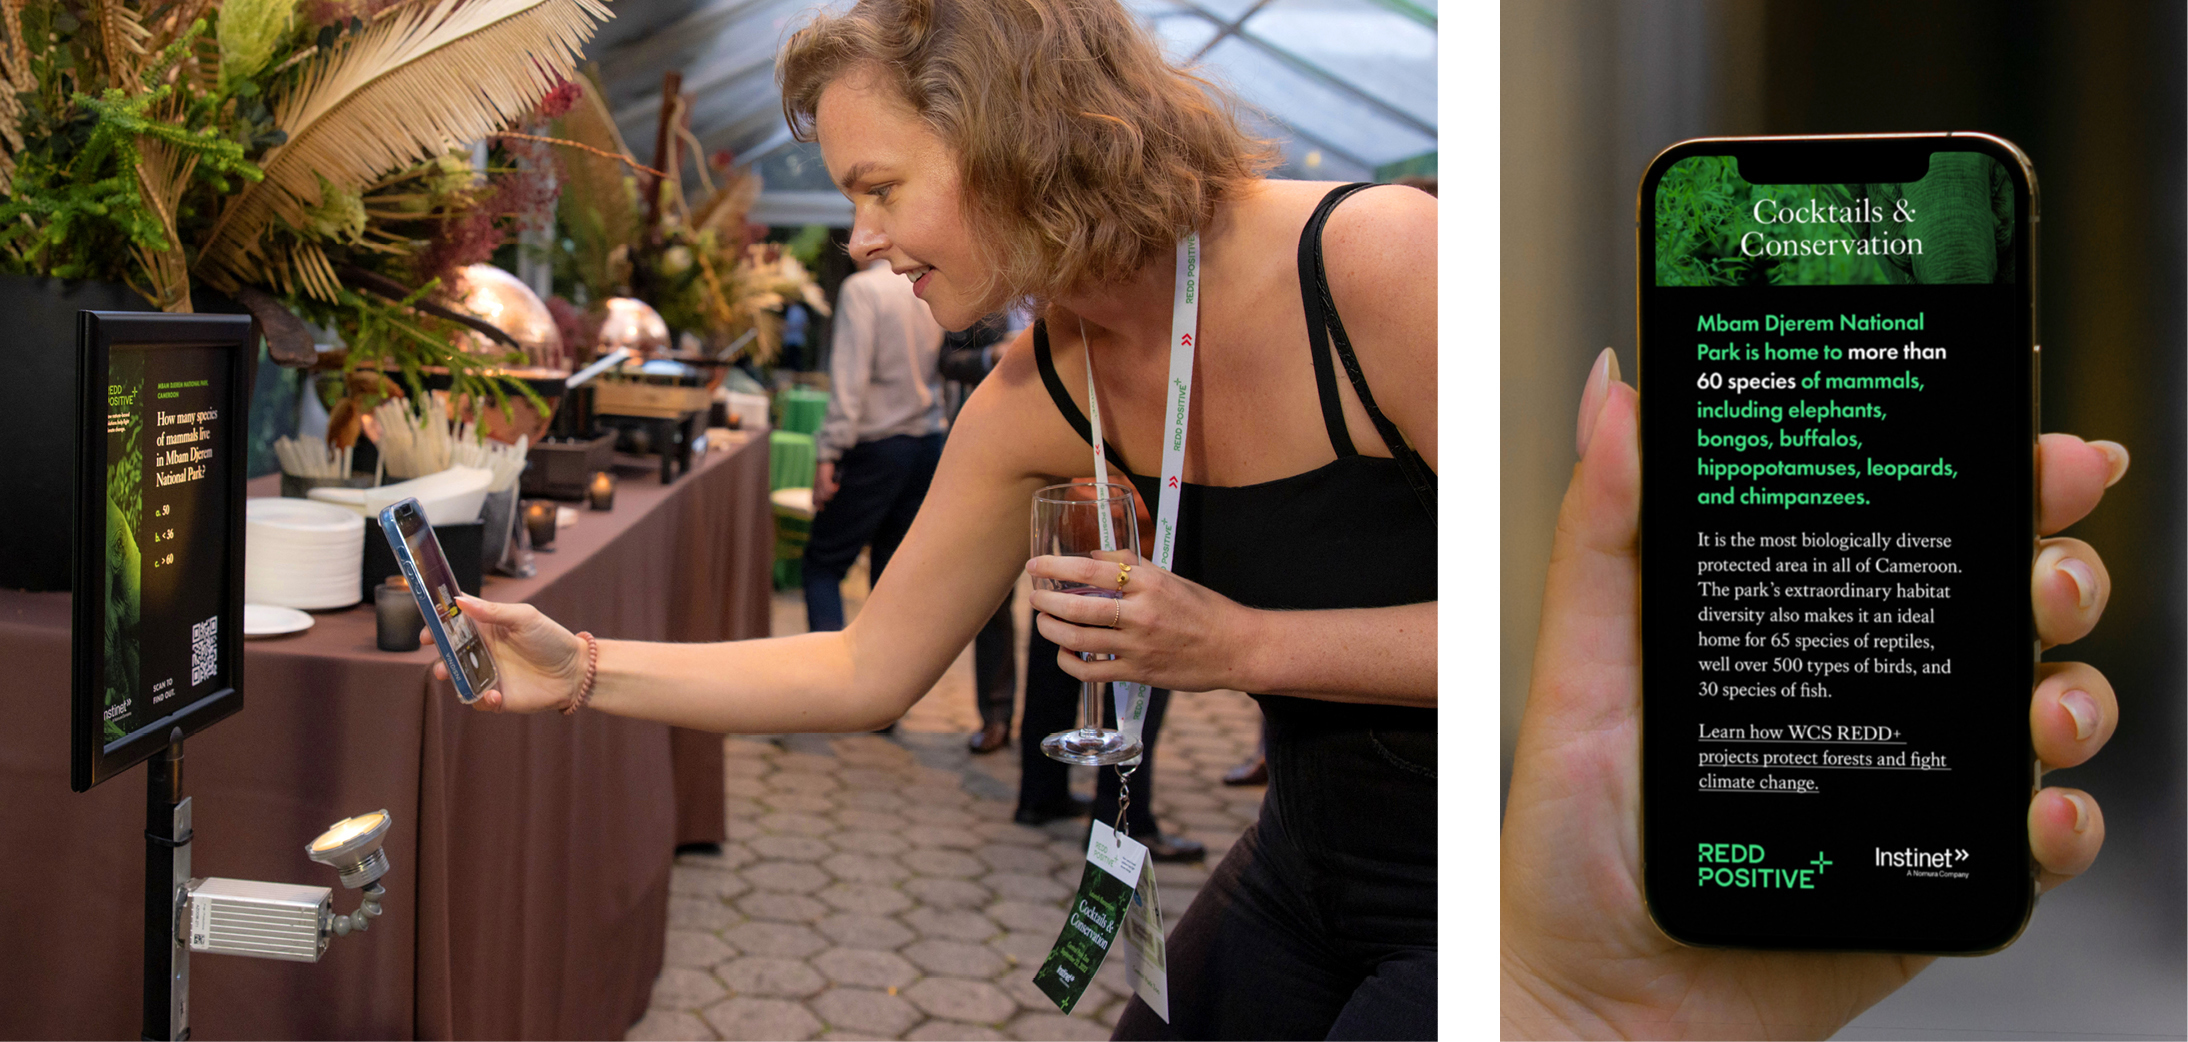 A guest leans forward to scan a QR code on a small with her phone at the REDD Positive Cocktails and Conservation launch event.